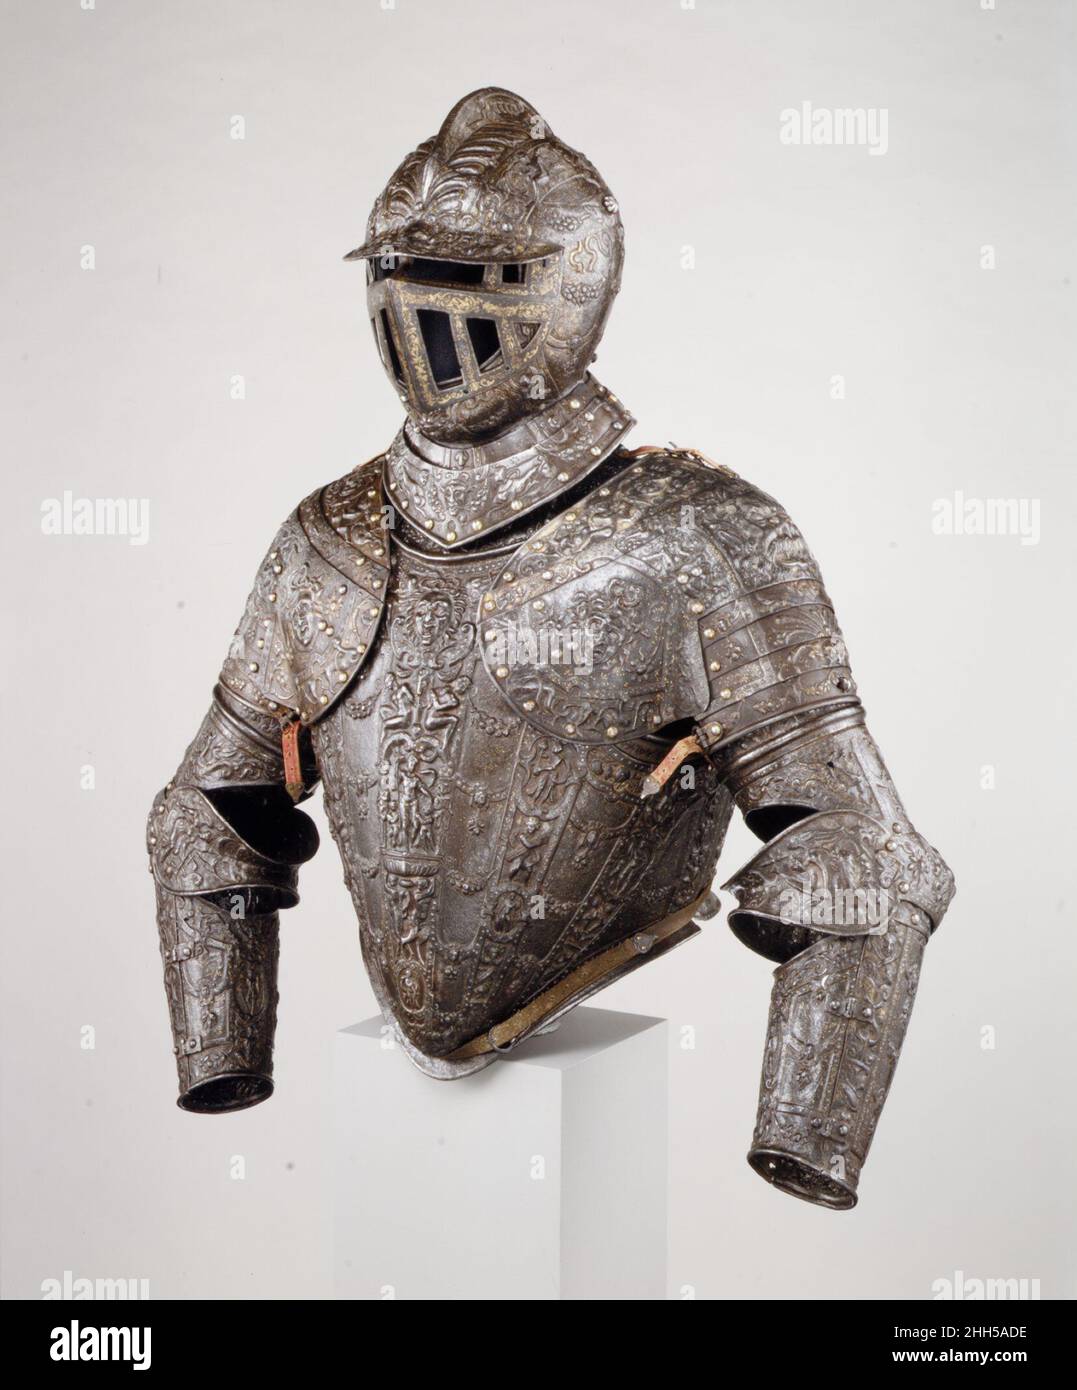 Armor of the Dukes of Alba ca. 1575–85 Lucio Piccinino Italian This is one of the few armors attributable to Lucio Piccinino, the last of the great Italian armor embossers. Distinctive of Piccinino's style is the covering of the armor surface with a dense network of embossed ornament with vertical bands connected laterally by swags of acanthus and fruit. Originally, the steel ground was blued and highlighted with gold and silver damascening. Although damaged by fire in the nineteenth century, this armor amply demonstrates Piccinino's skill in designing a complex program of Classically inspired Stock Photo